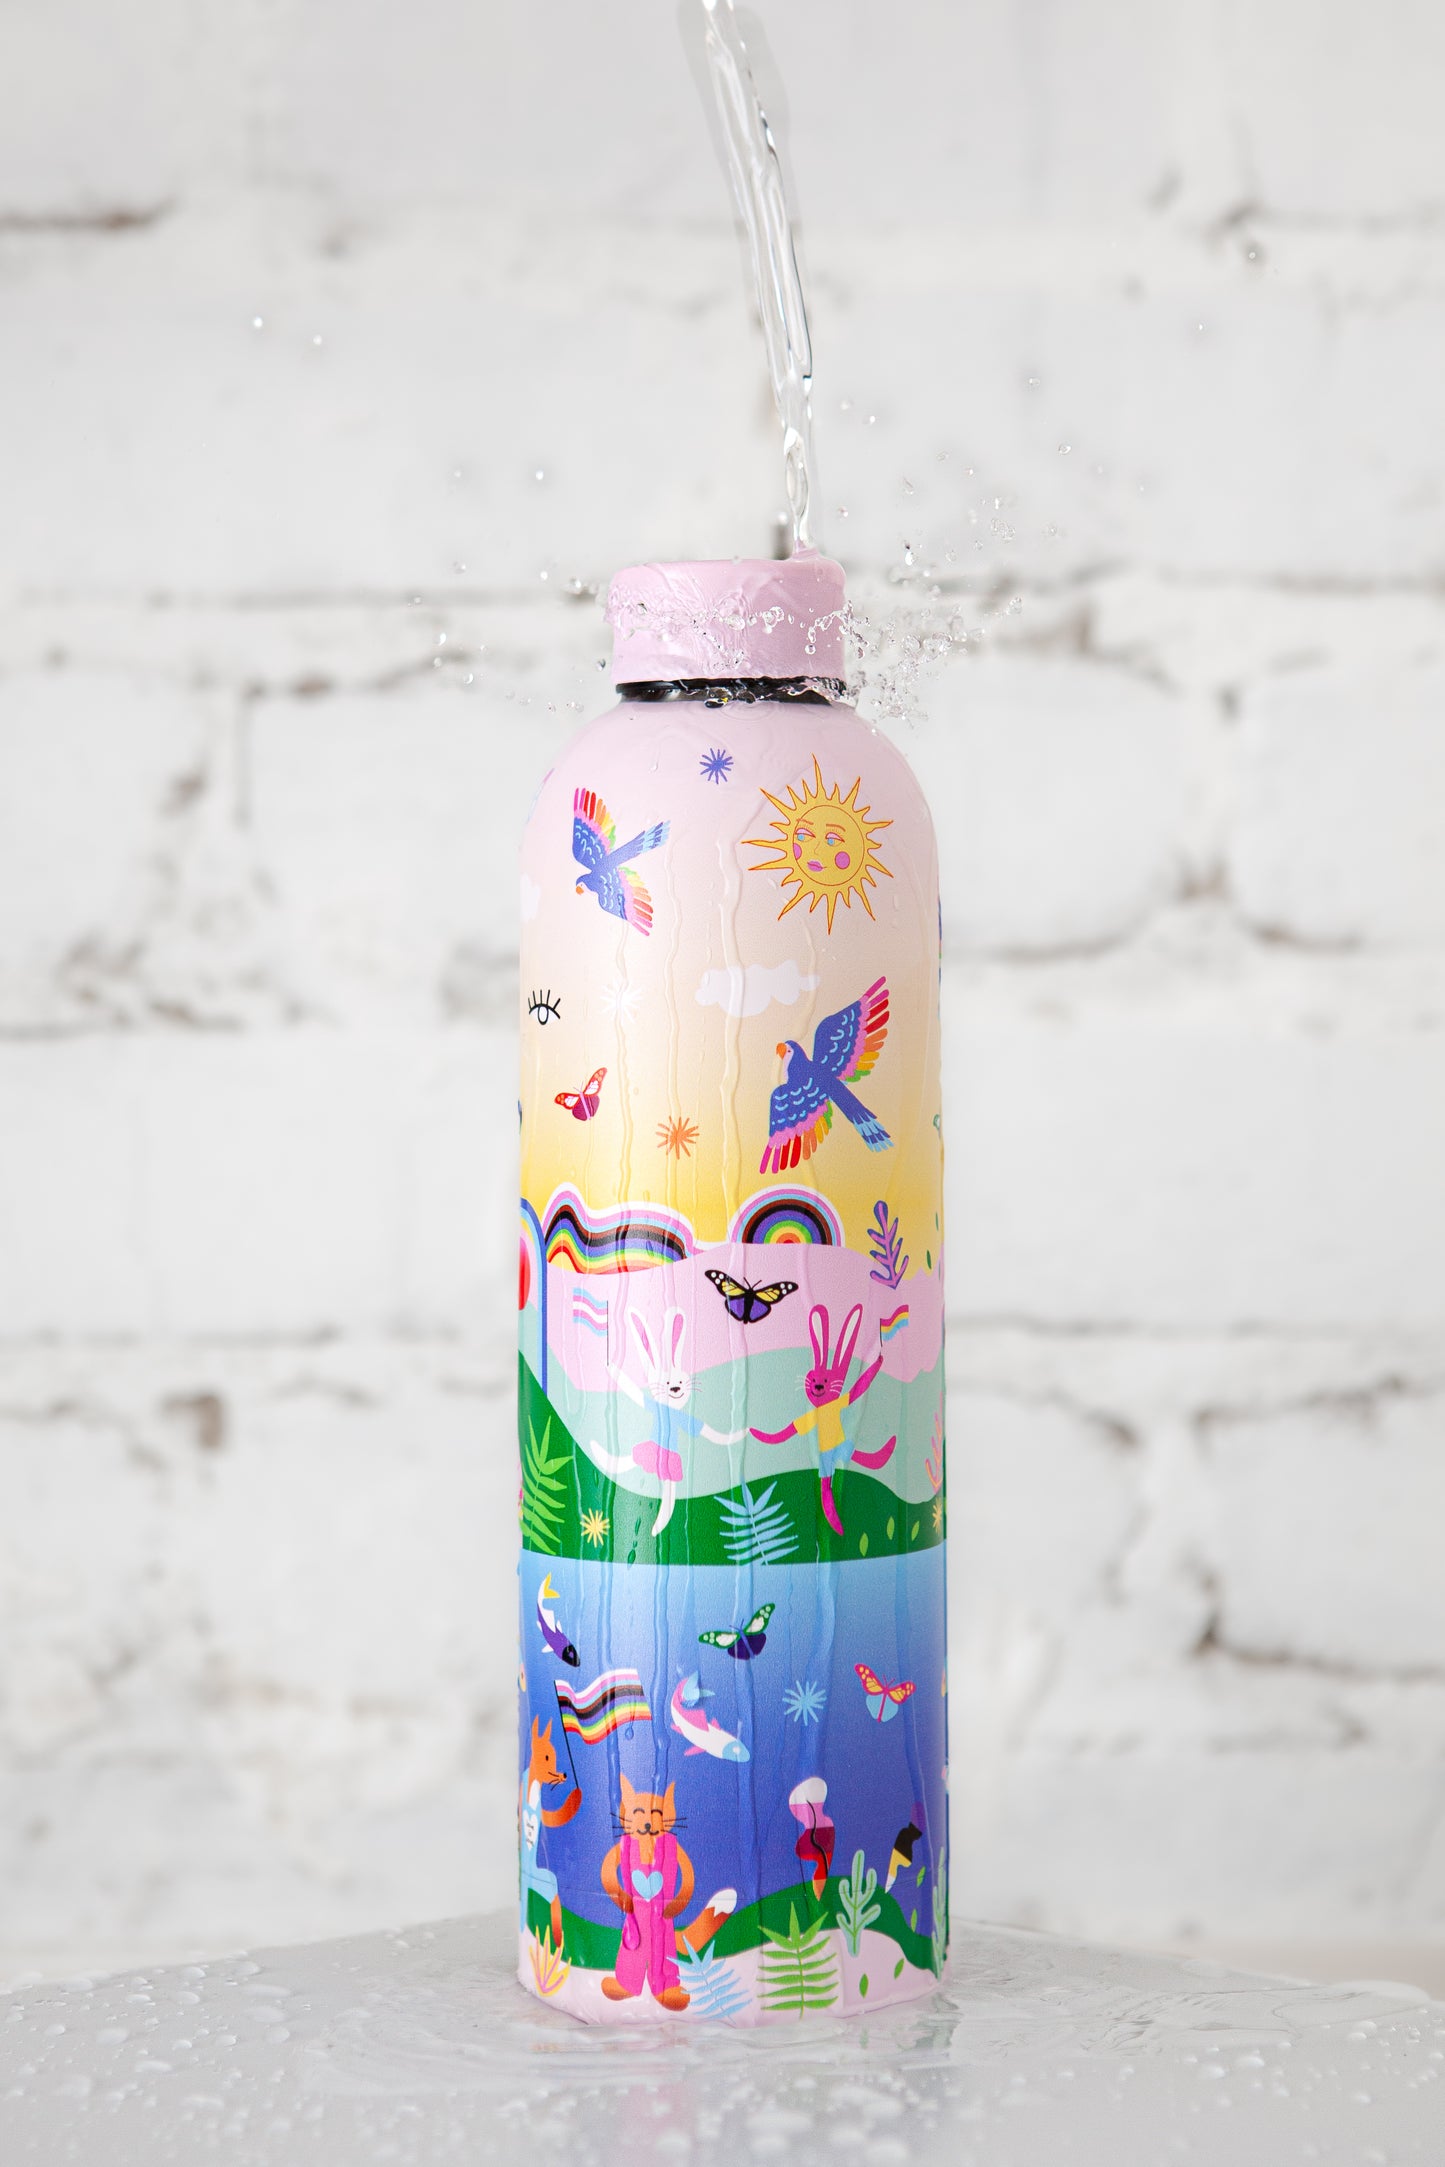 Badgie Be Yourself Steel Water Bottle BPAFree. Product image of steel bottle bpafree against white aesthetic brick background, with water pouring over the bottle, splashing around the colourful rainbow design with Australian artistry and lgbt pride gay lesbian queer colours